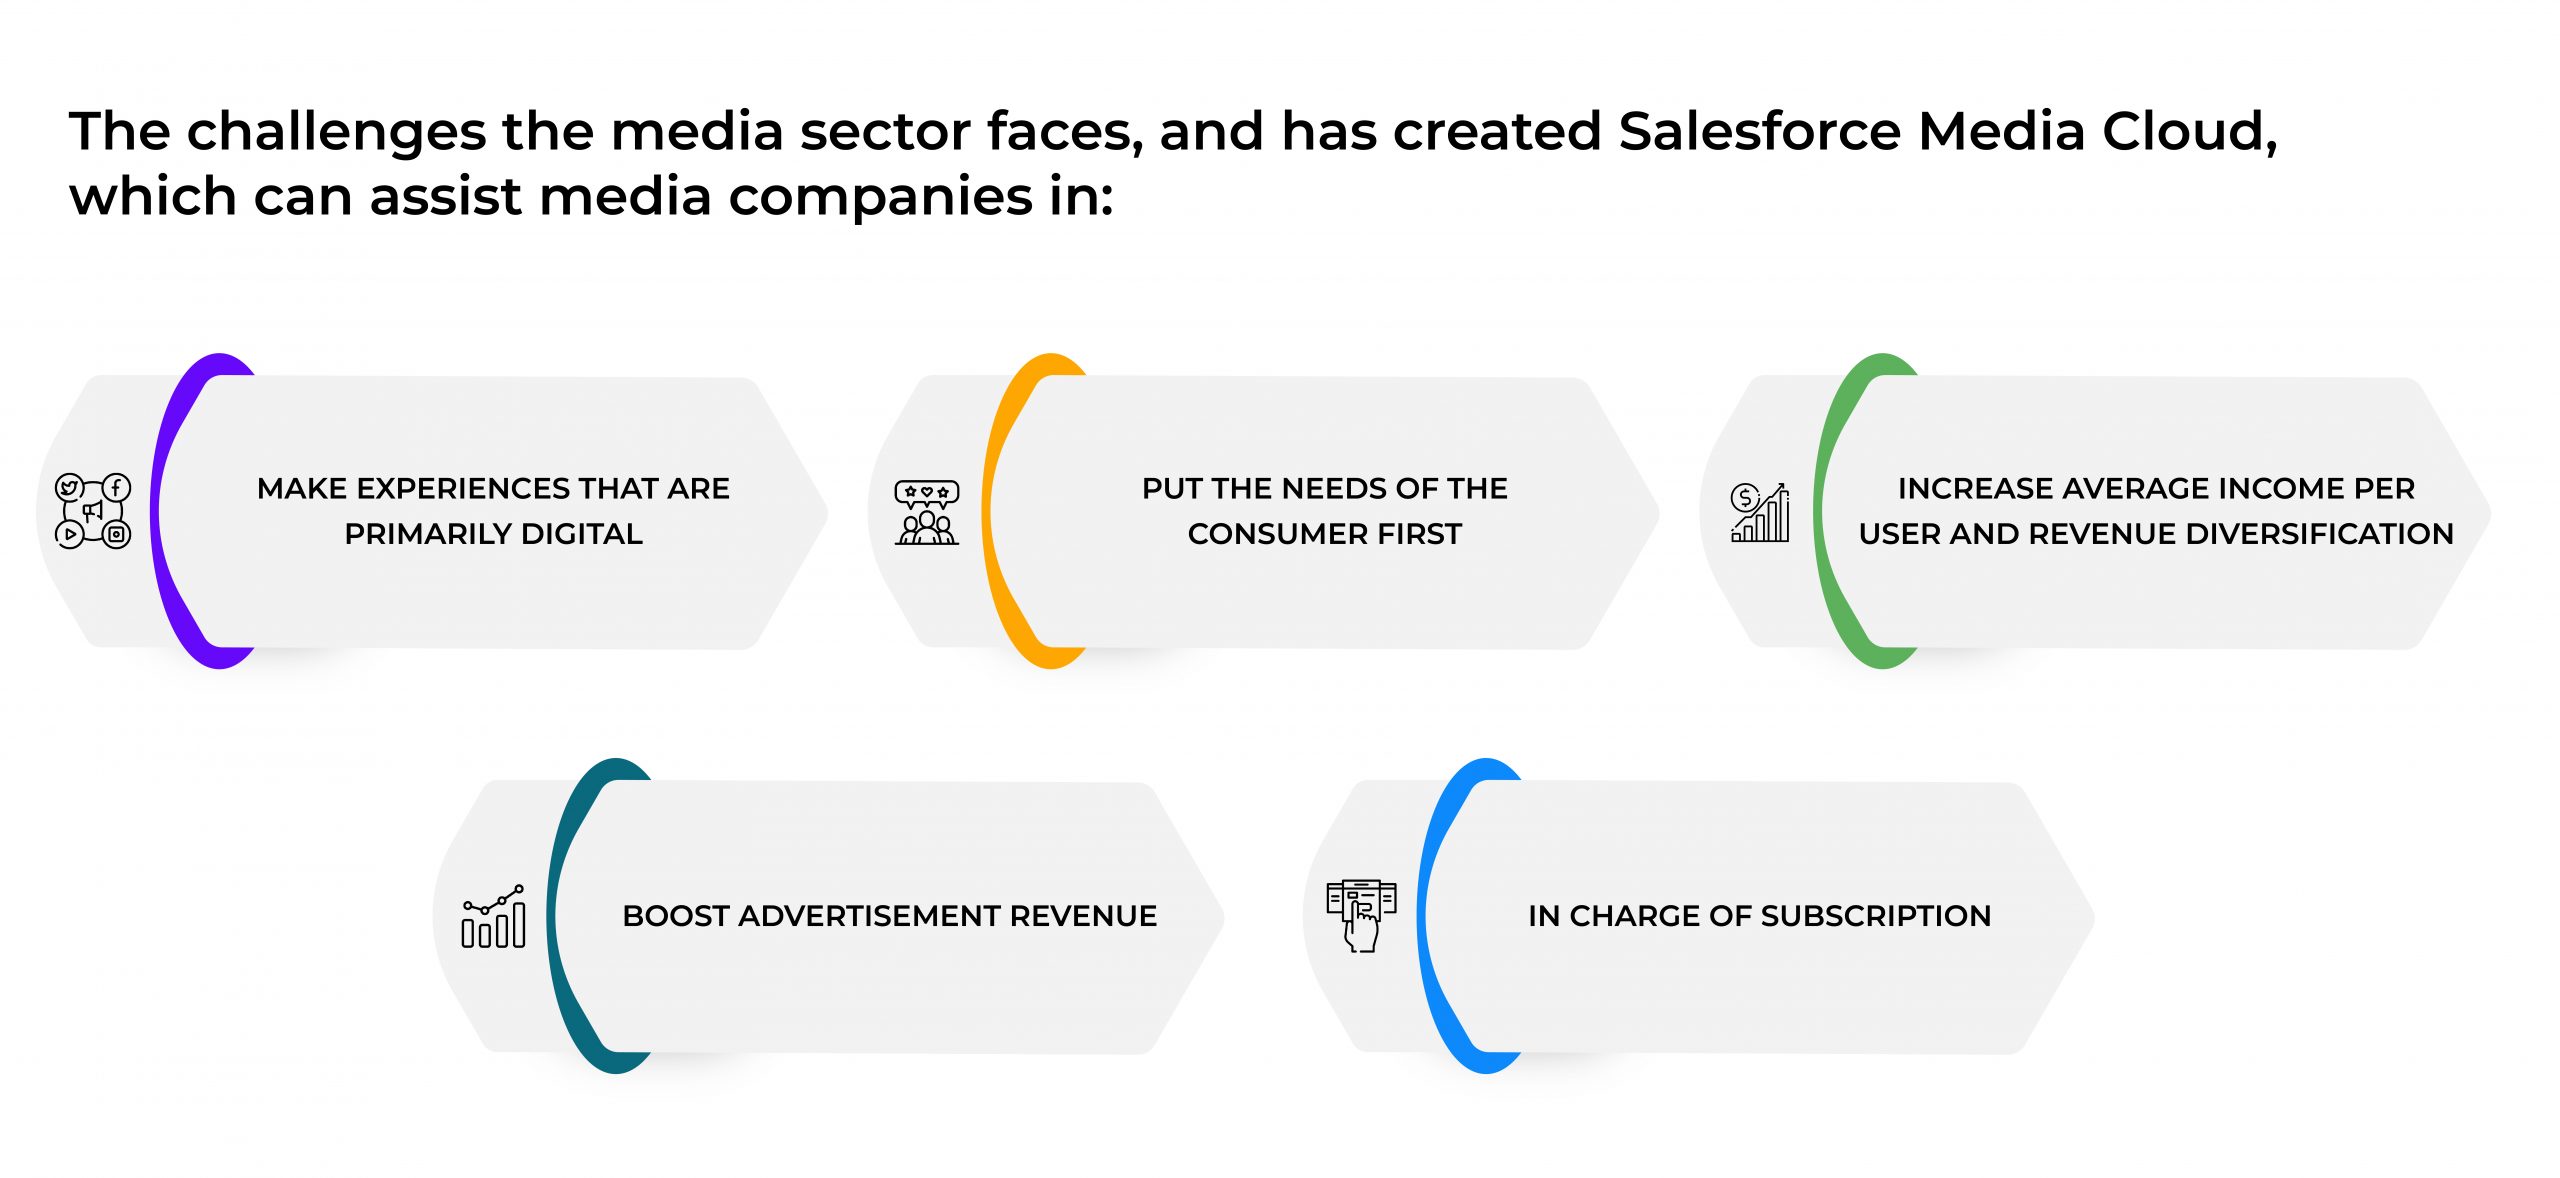 The challenges the media sector faces, and has created Salesforce Media Cloud which can assist media companies in